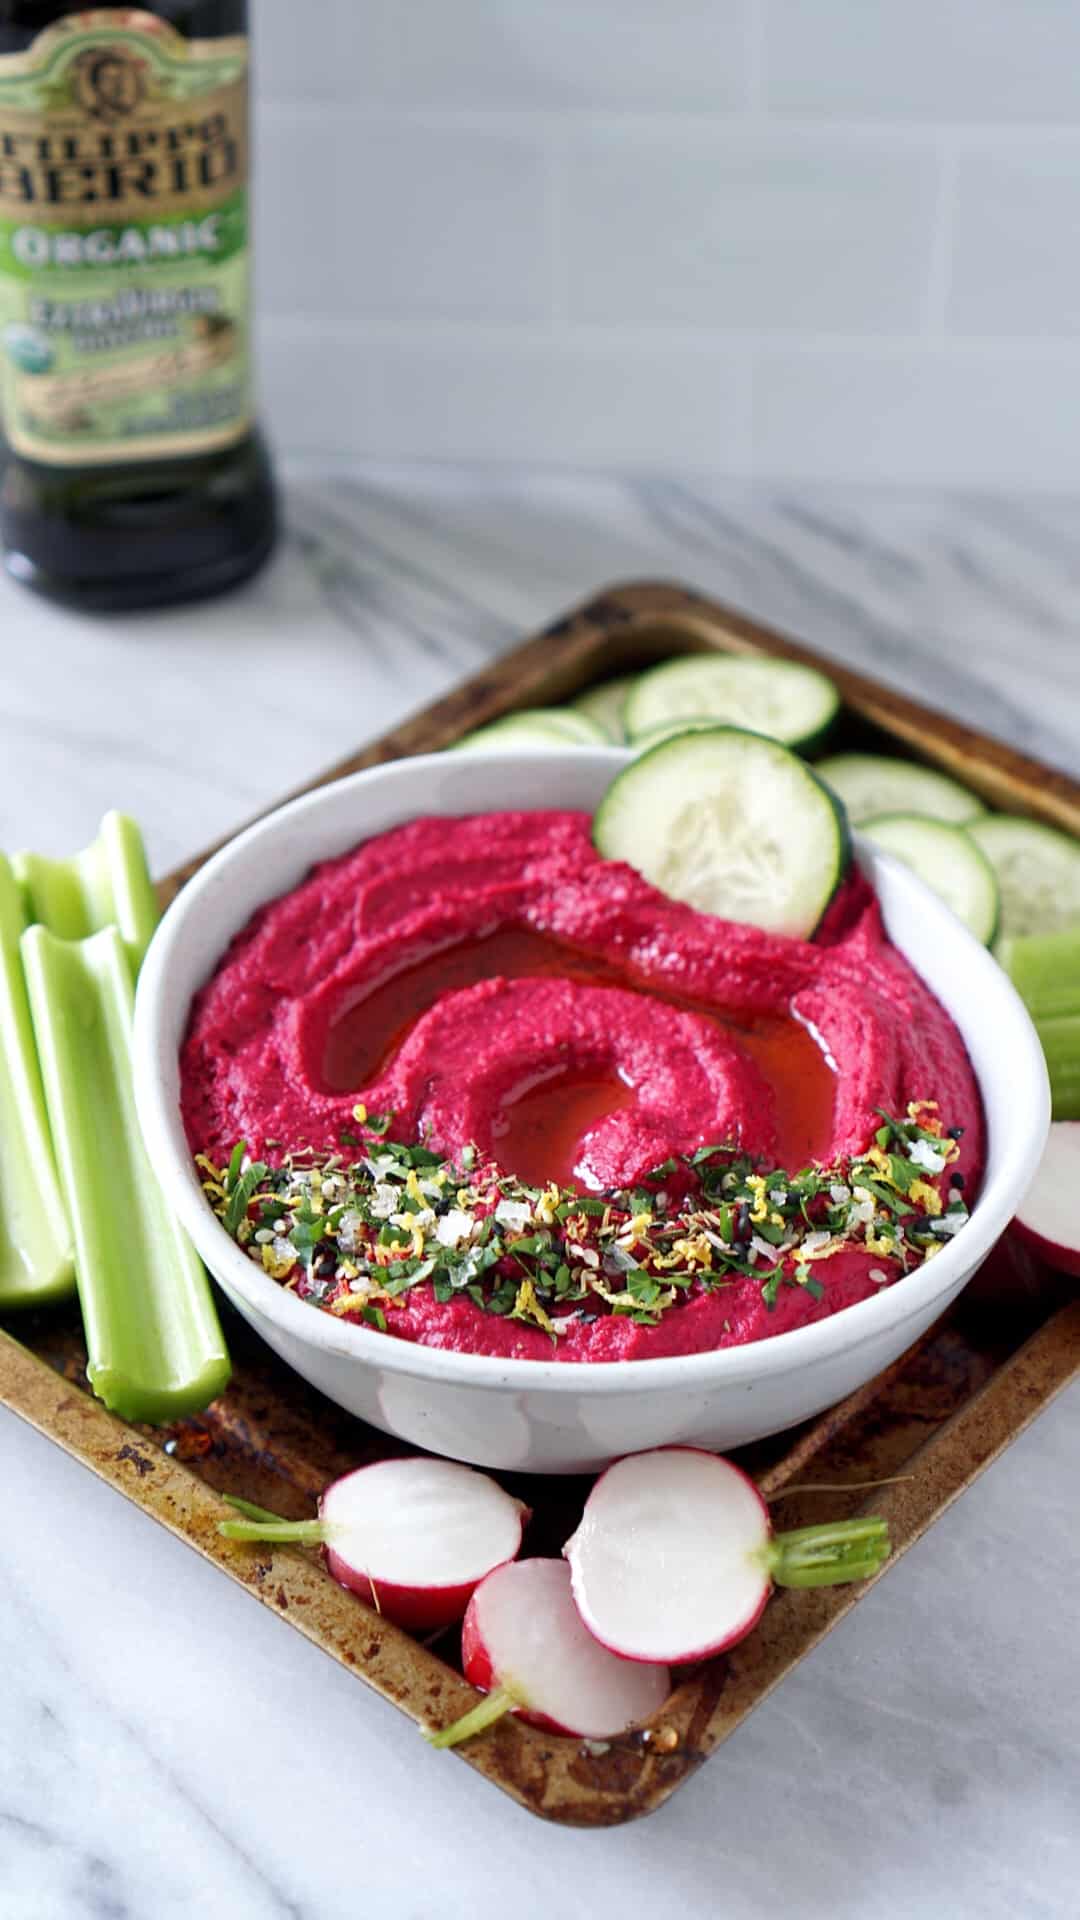 Cucumber dipped in beet hummus with vegetables on a tray